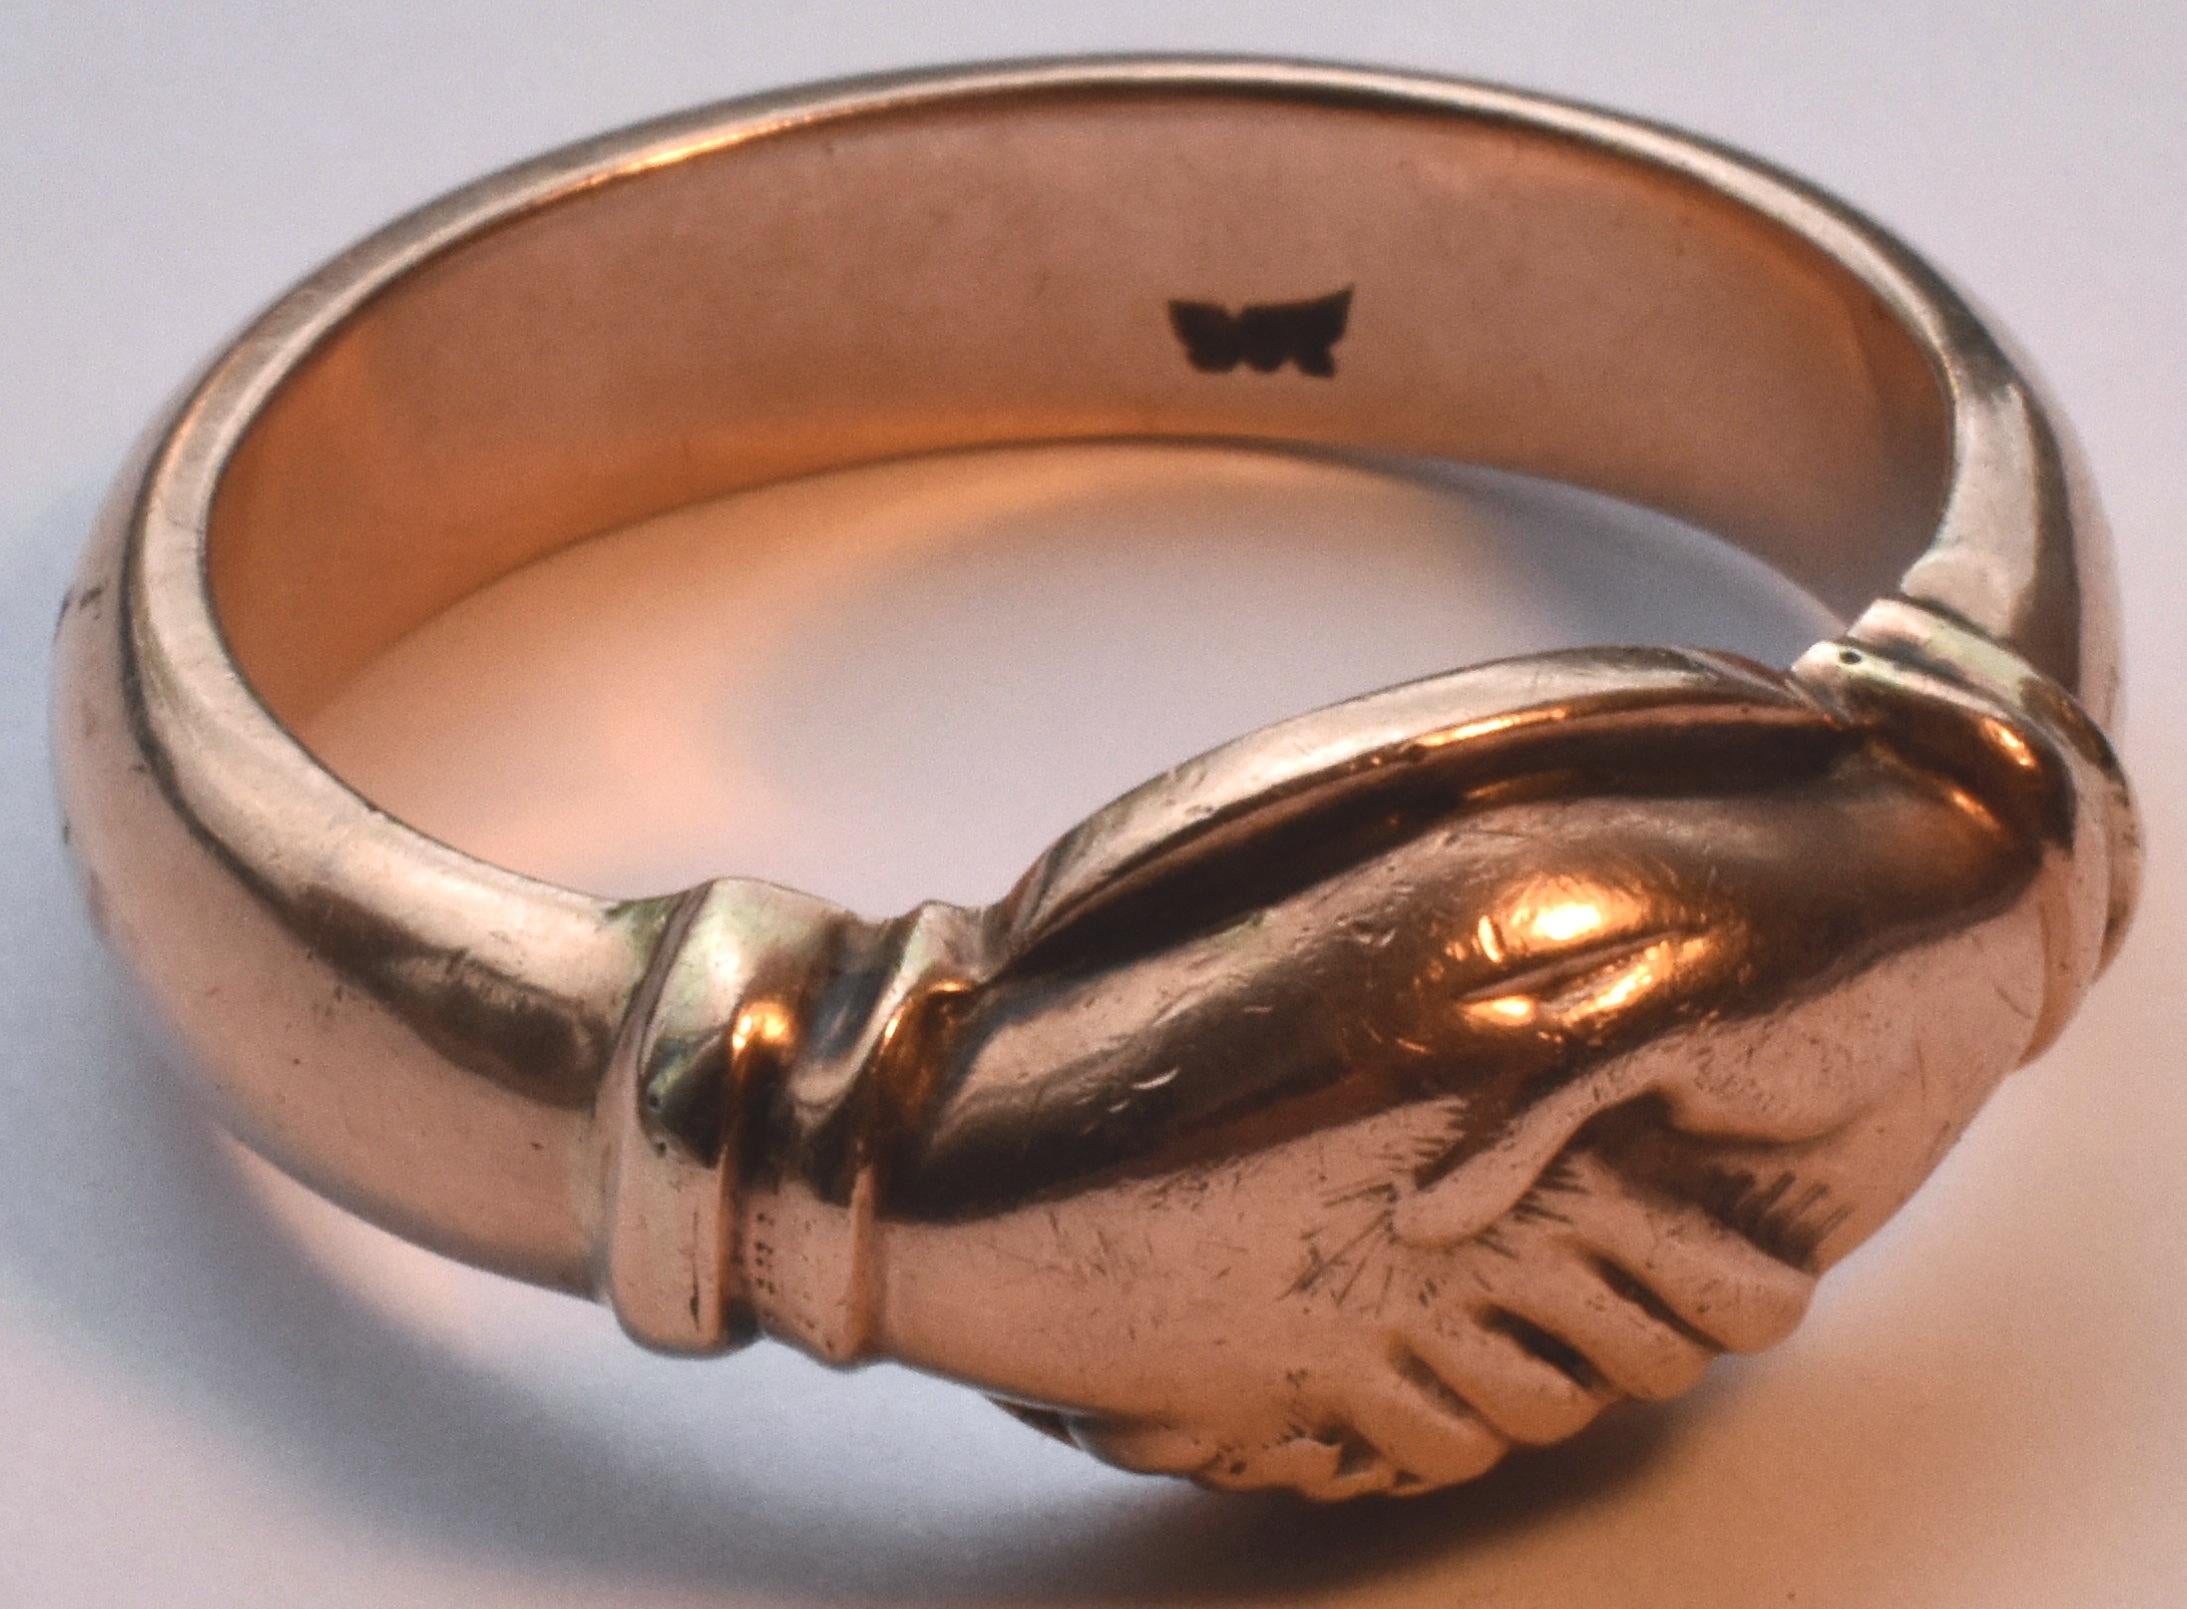 Wonderful 9K rose gold Fede ring with two hands clasped in friendship or betrothal. Fede, Italian for 